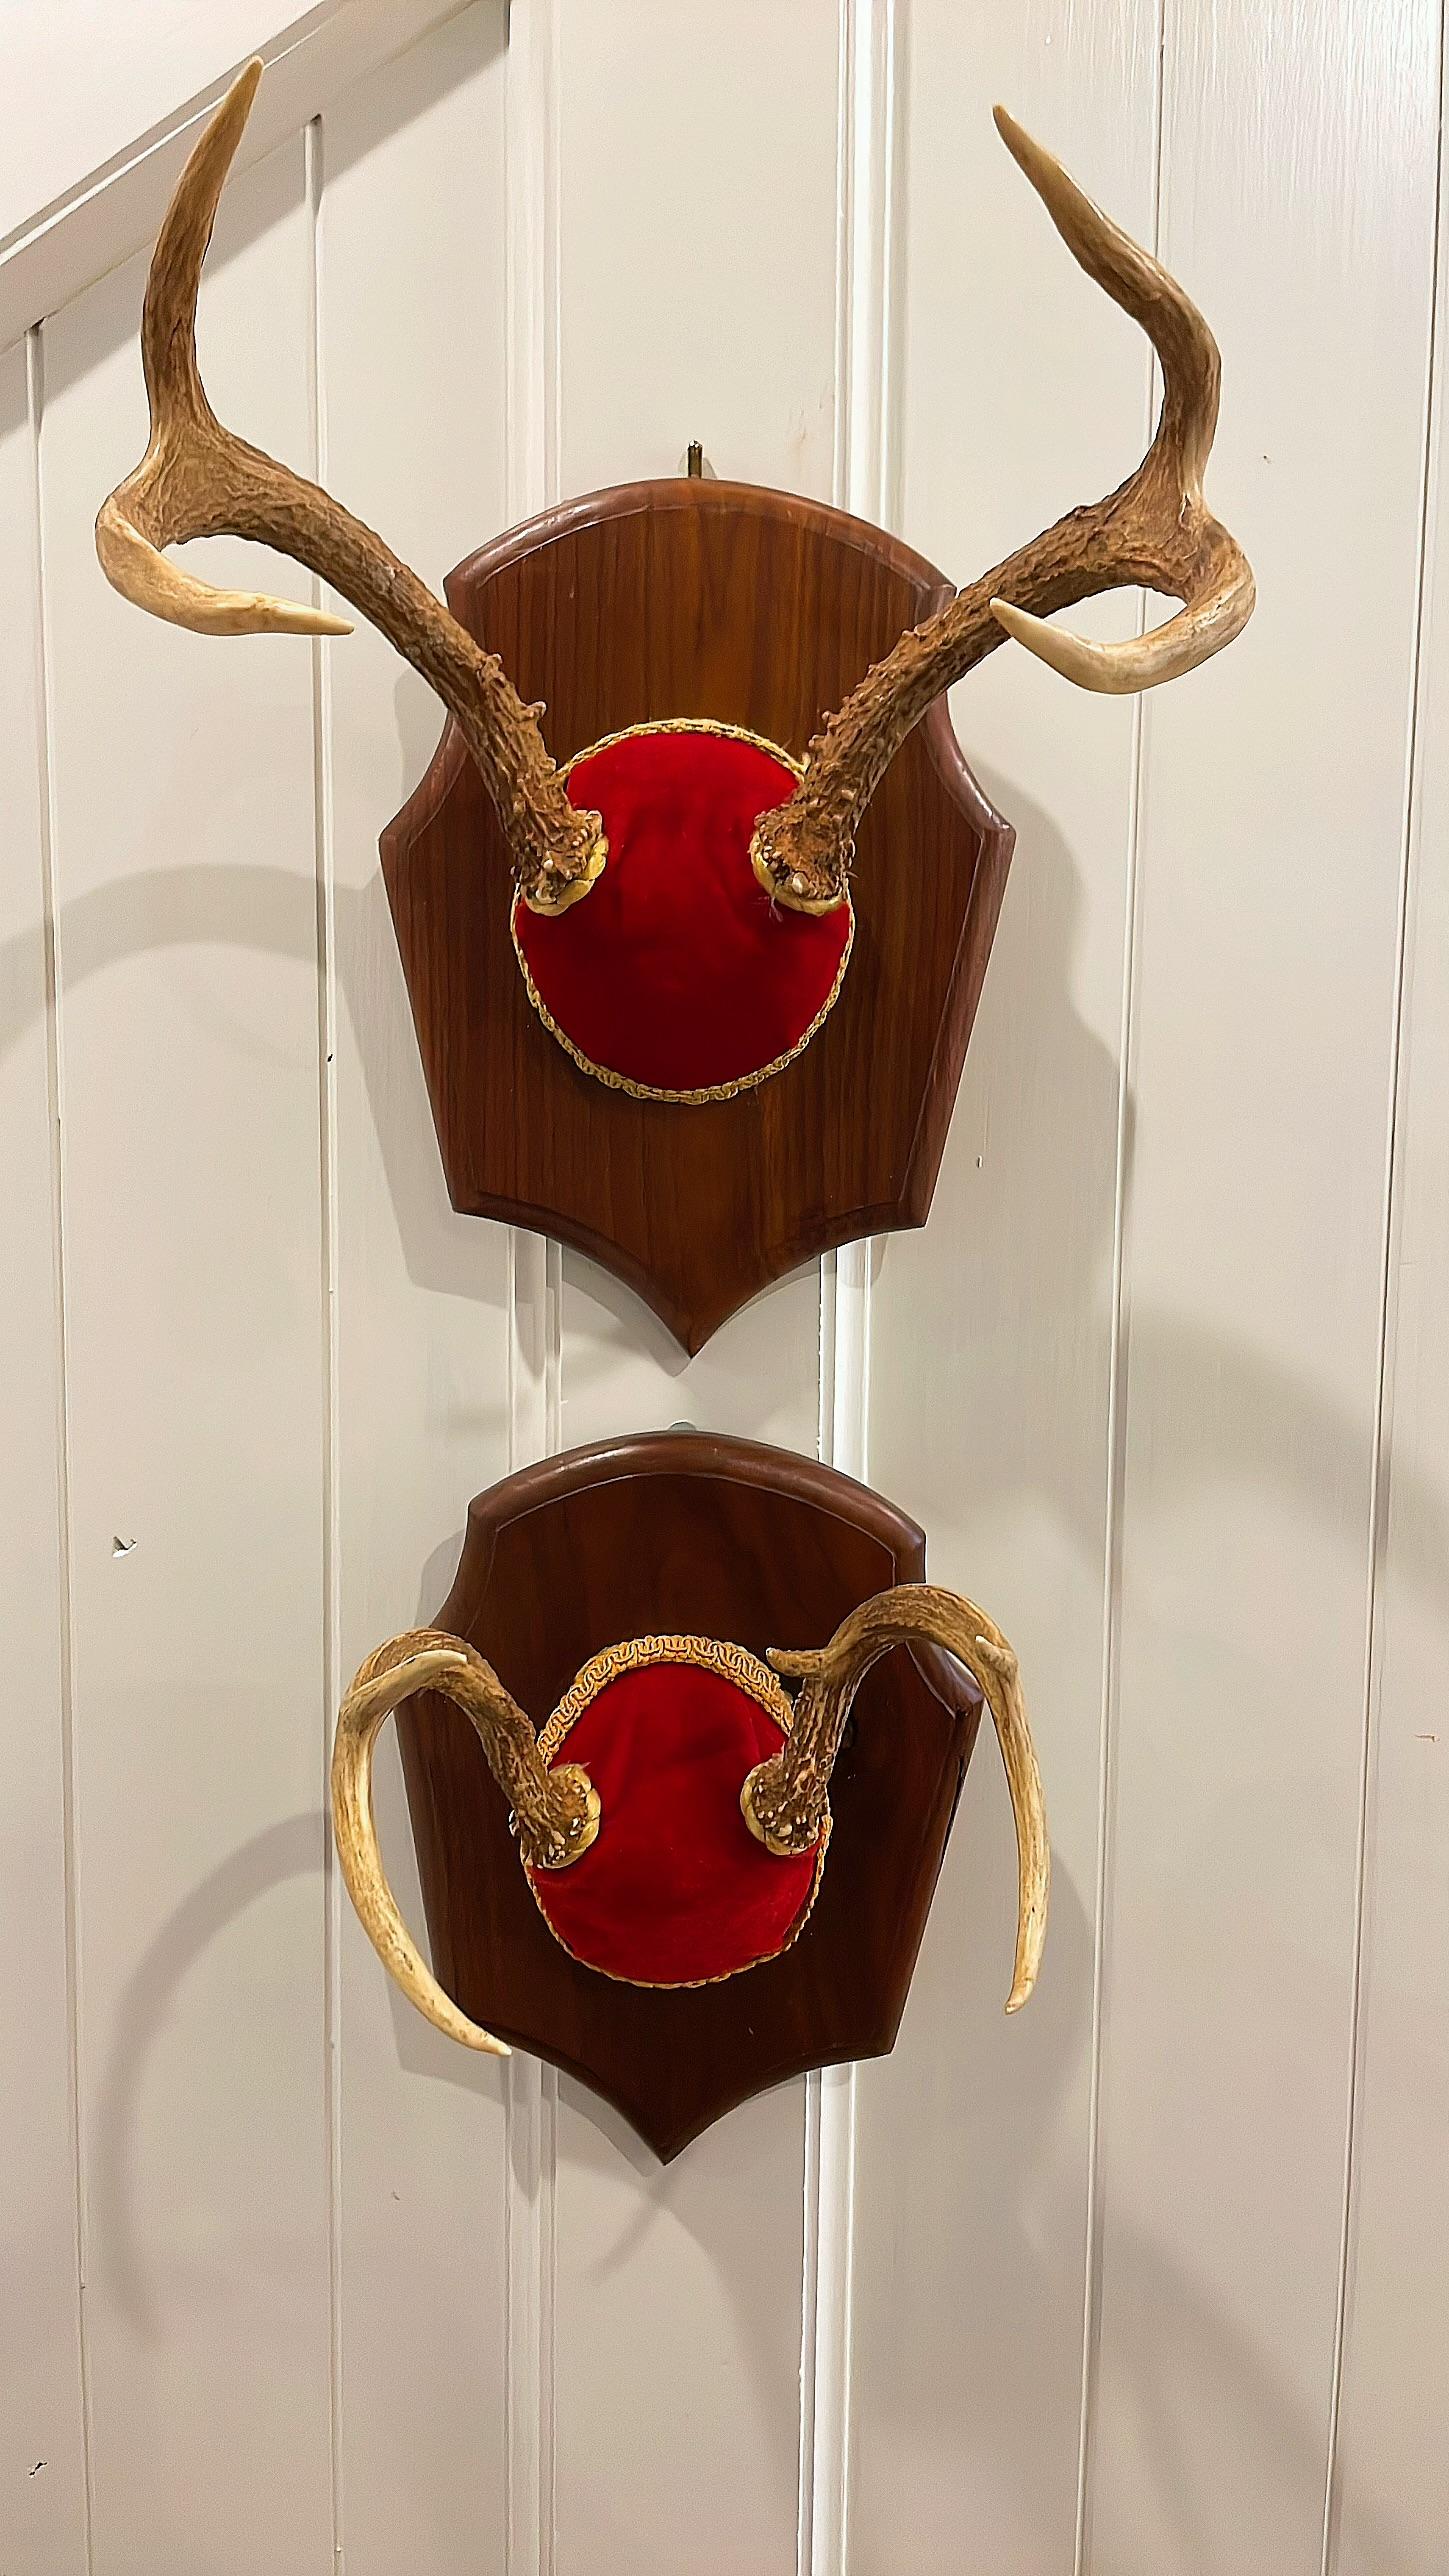 Beautiful mid century pair of deer antlers mounted on a carved wood plaque with the skull portion covered in ruby red velvet and lined with braided trim around the antlers and the outside.

Fabulous set of 4 and 5 point deer antlers . One measures